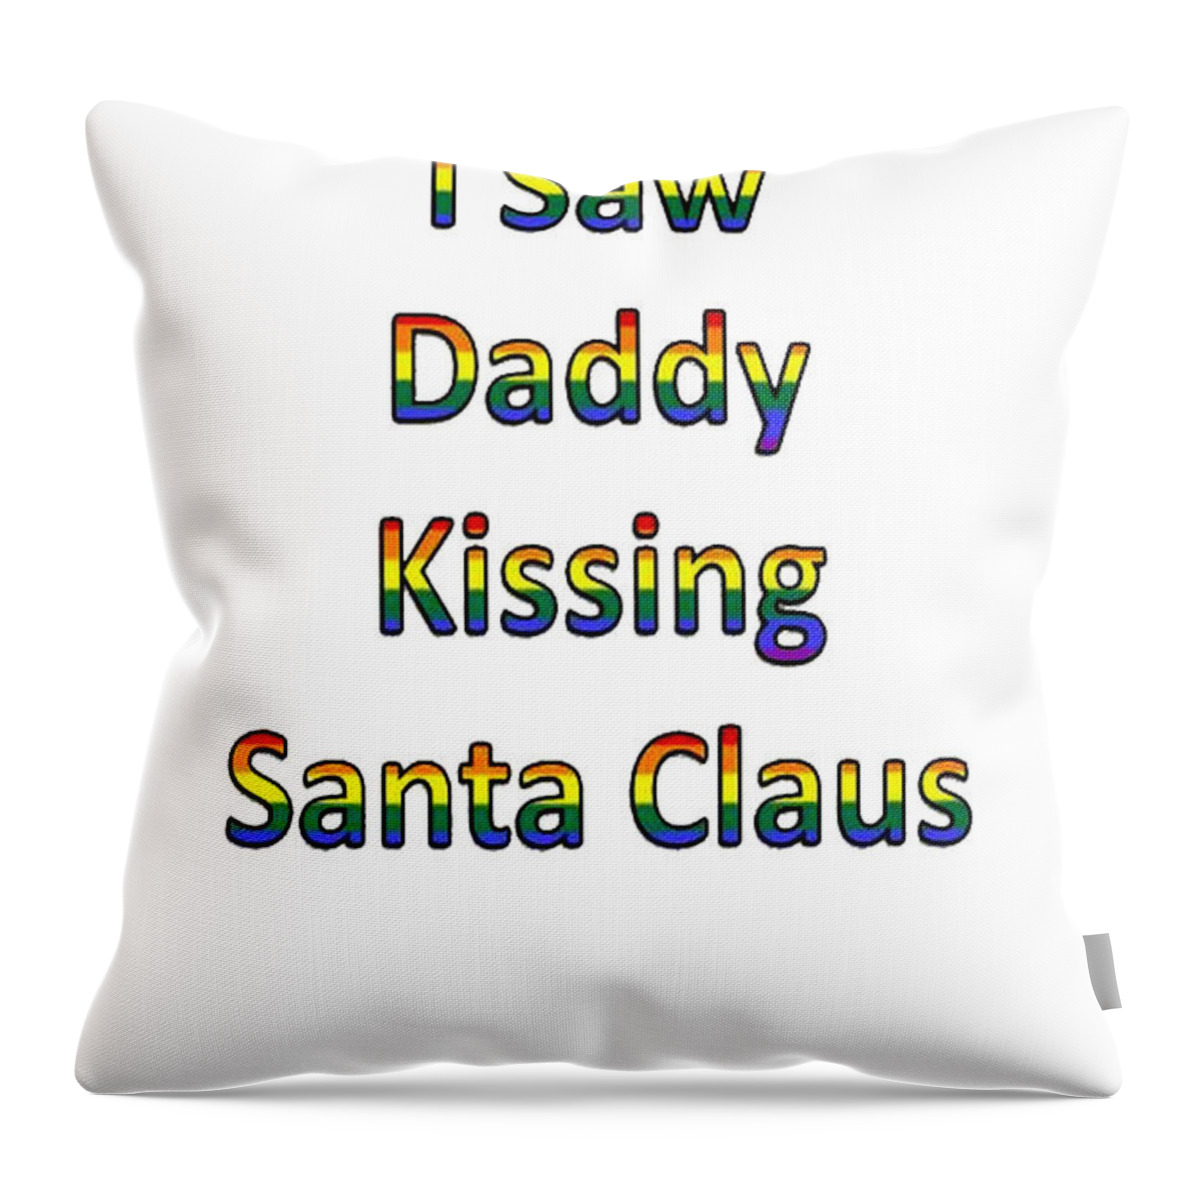 Same Sex Marriage Throw Pillow featuring the painting I saw Daddy Kissing Santa Claus by Taiche Acrylic Art